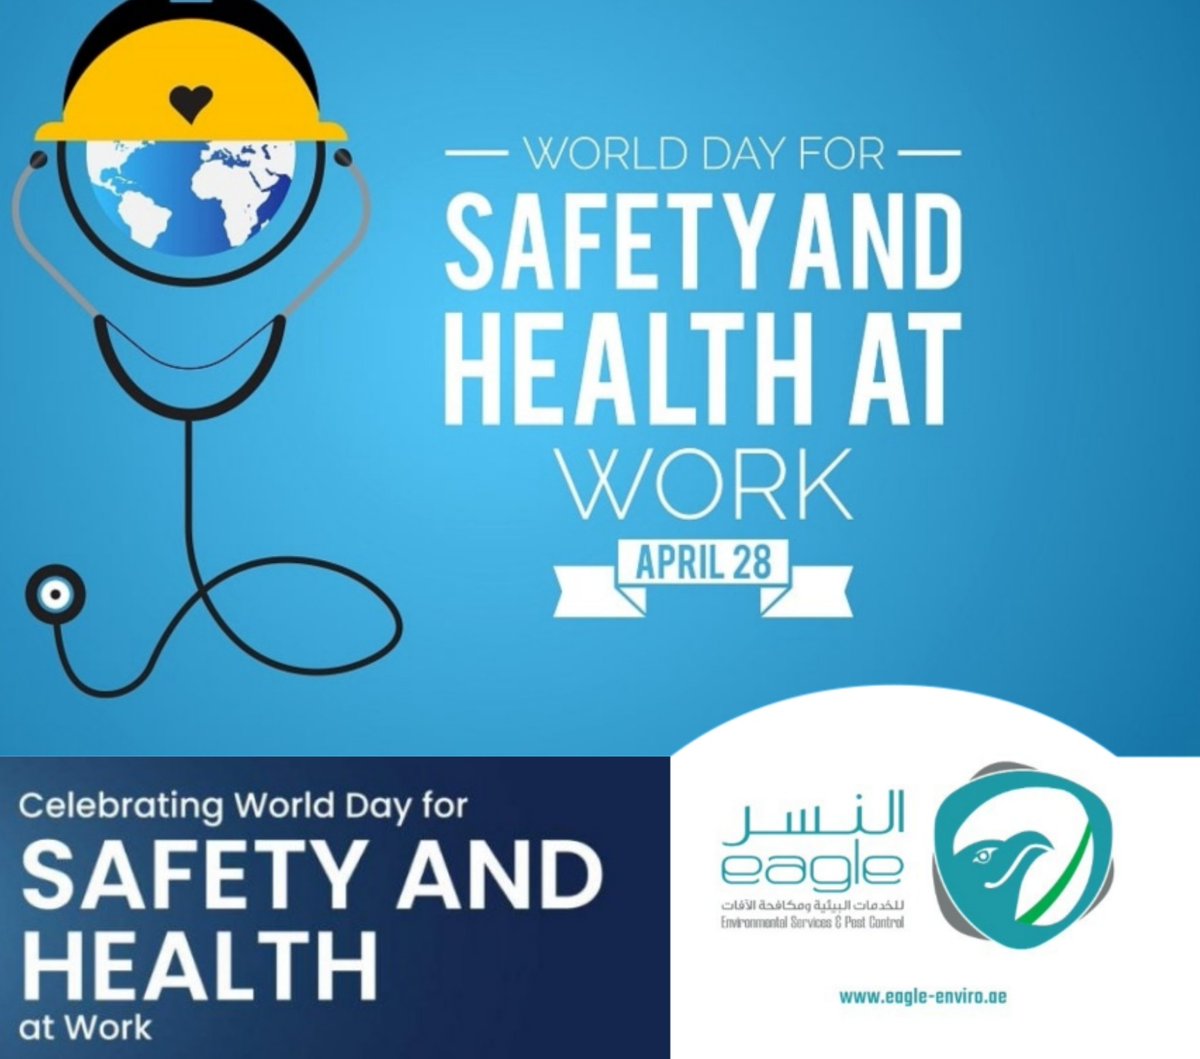 'World Day for Safety and Health at Work' At Eagle, we take pride in sending everyone home safely, everyday! Hats off to all fellow Safety professionals, Happy World Day for Safety and Health at Work! #eagleenvironmentalservices #healthandsafety